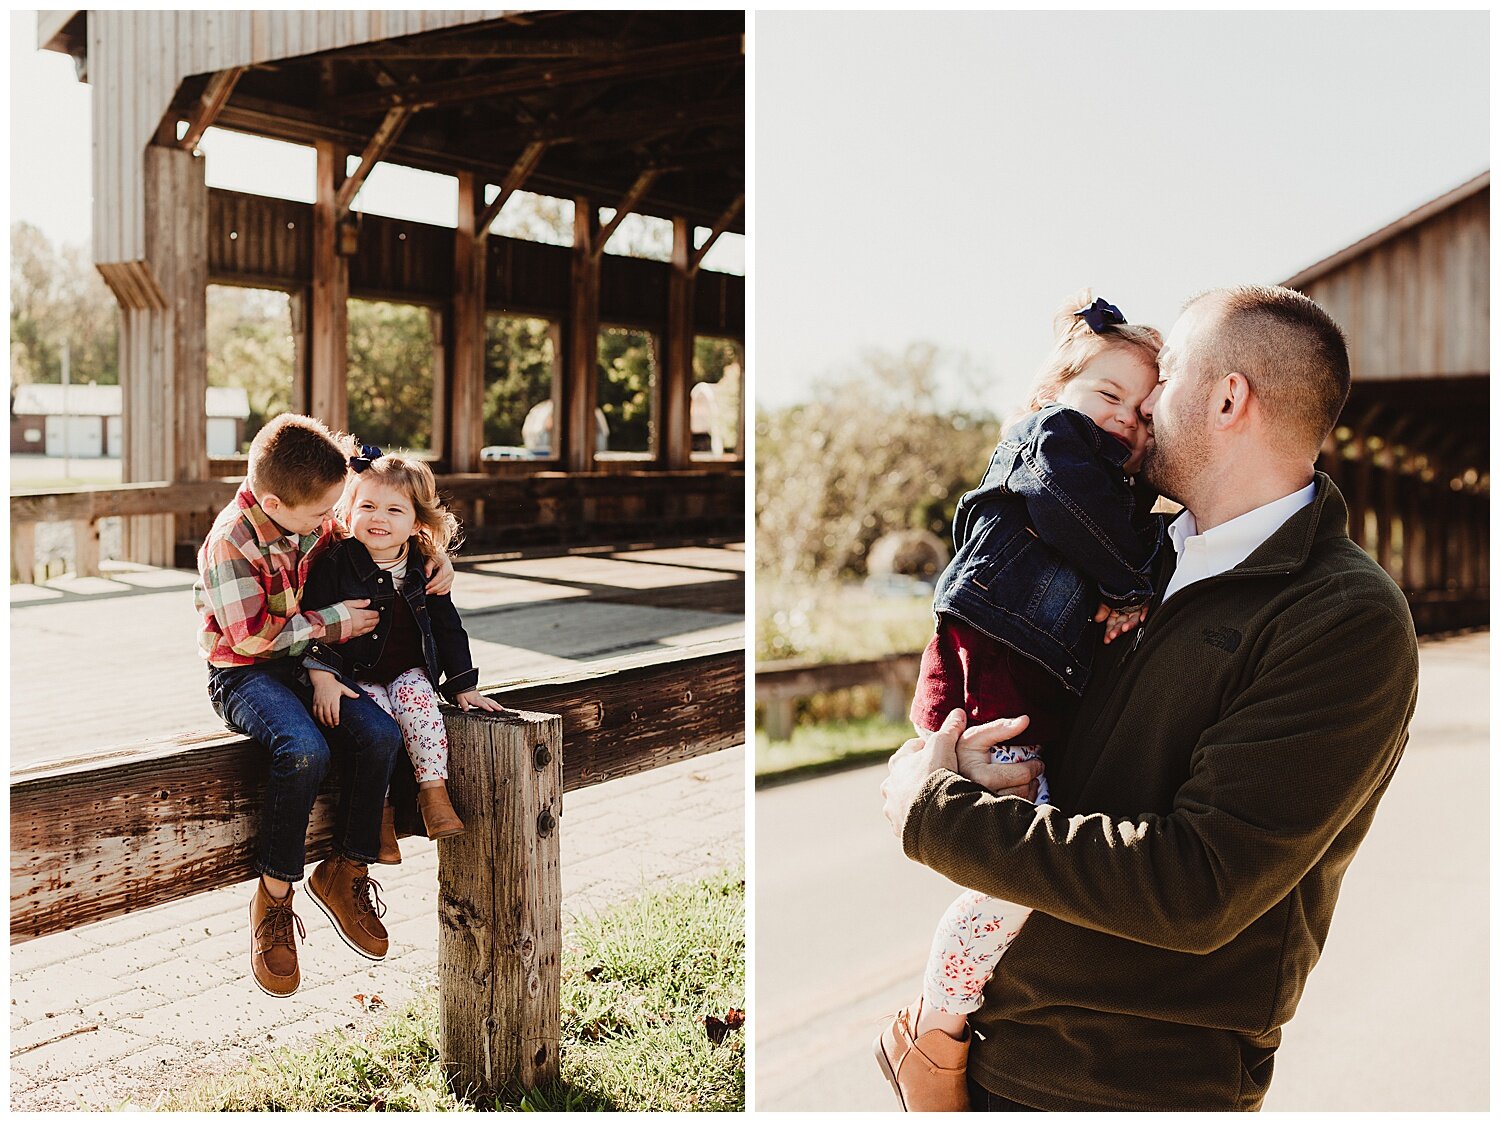  Both of these shots make me smile! But that sweet daddy daughter one… gah, adorable. 